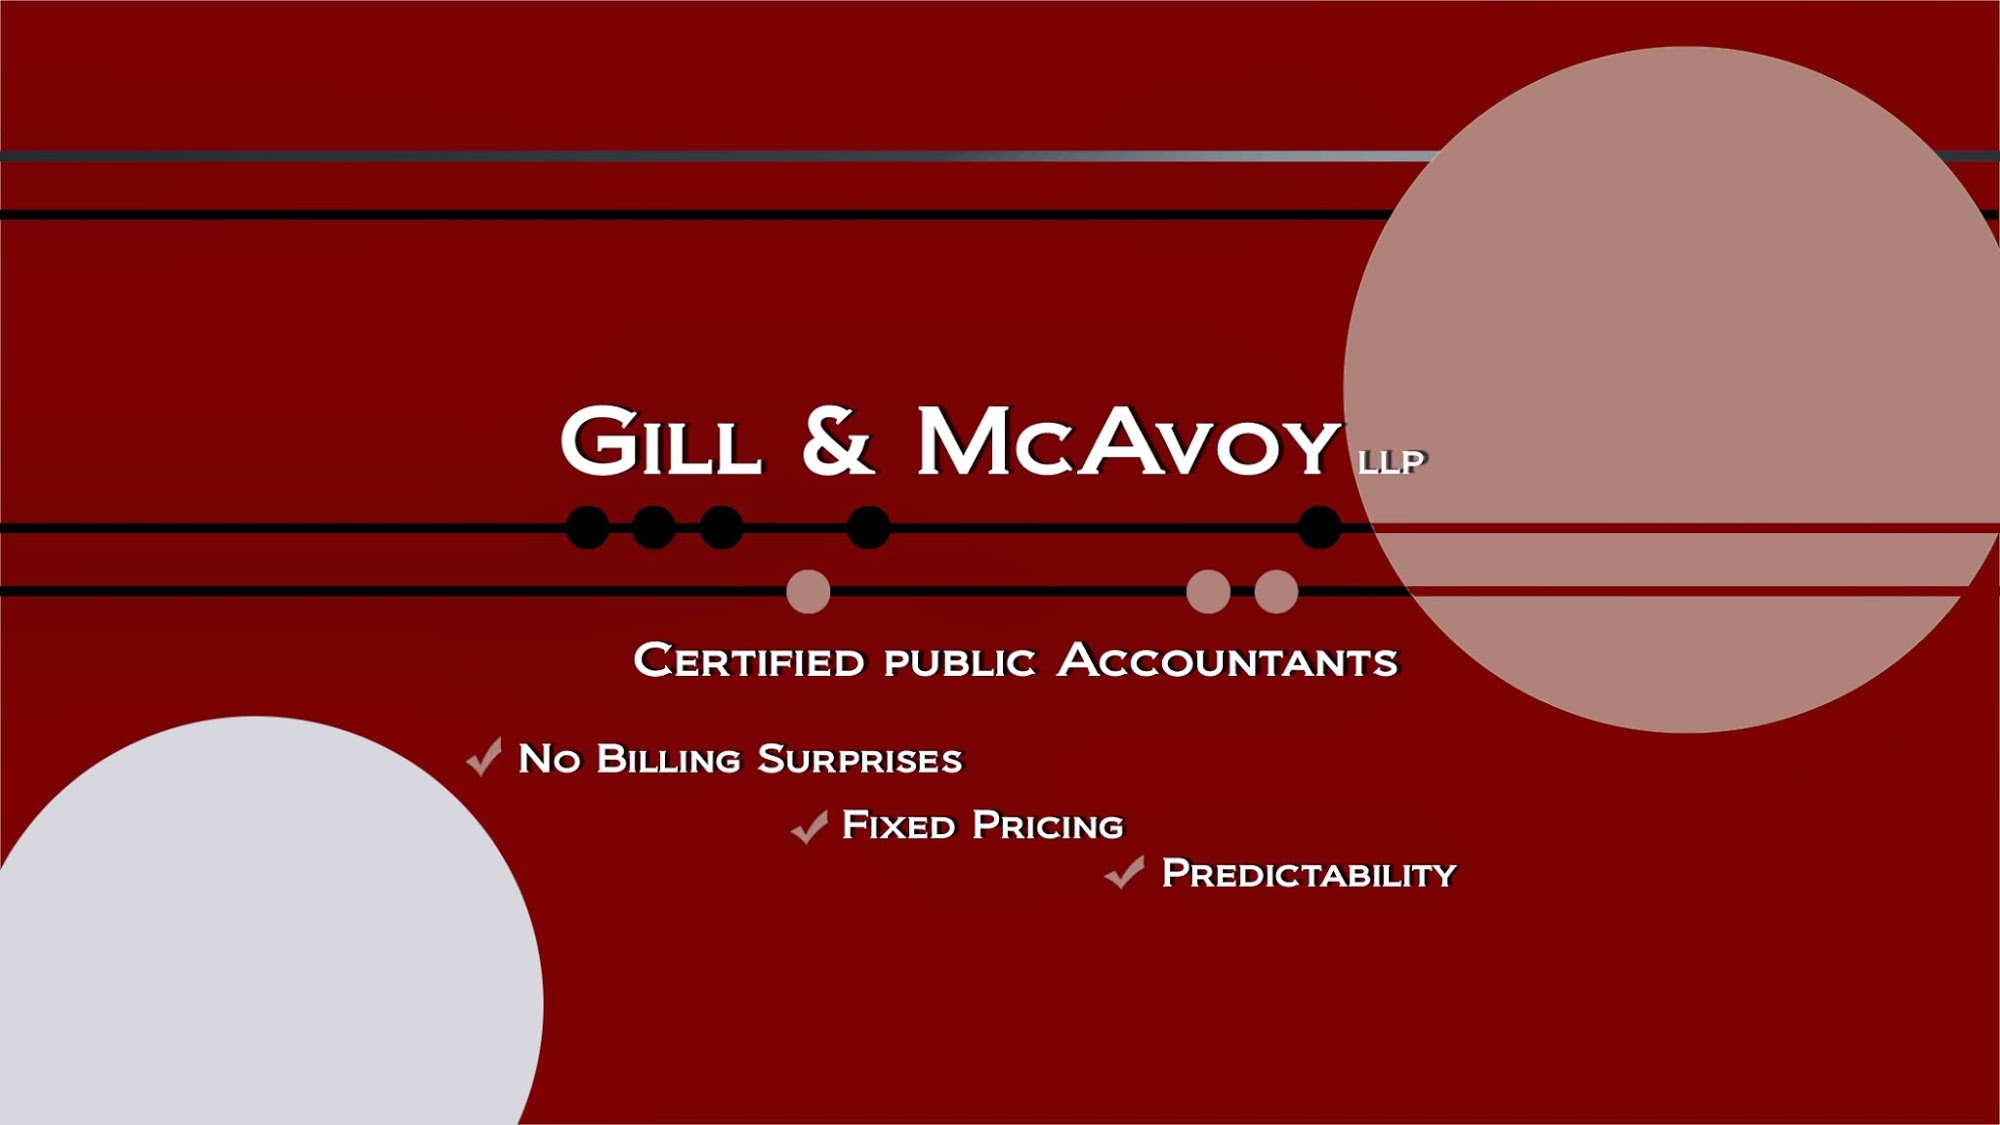 Gill & McAvoy, LLC – CPA Accounting Services Fresno, CA